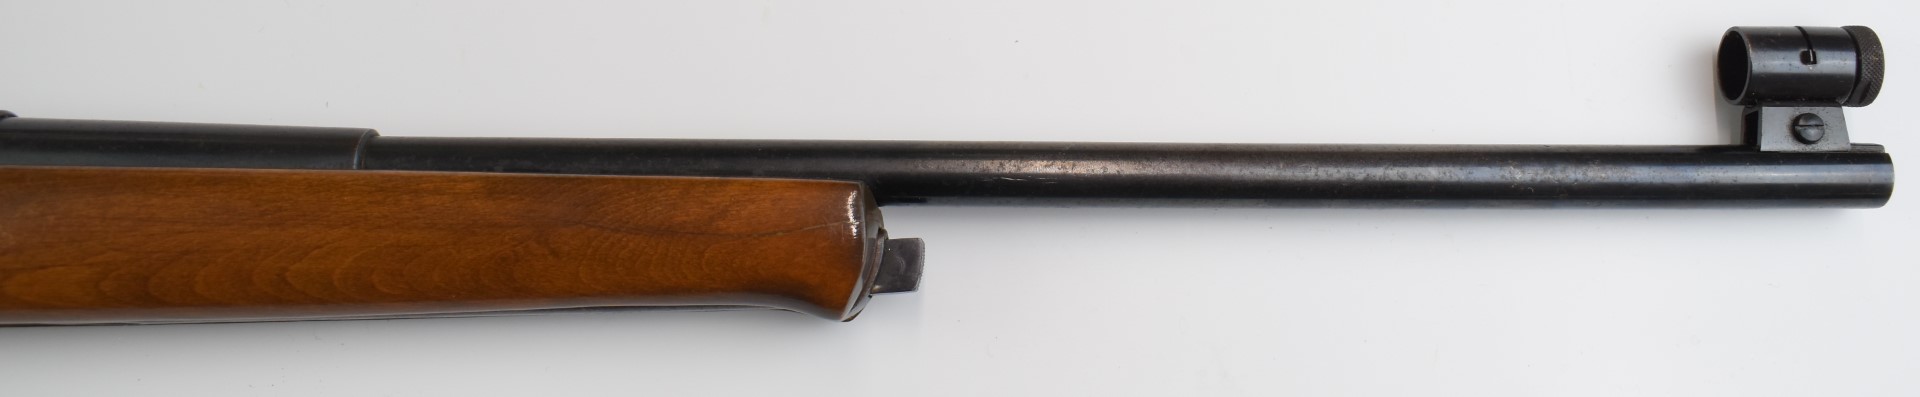 Original Model 50 .22 under-lever air rifle with chequered semi-pistol grip, adjustable trigger, - Image 5 of 10